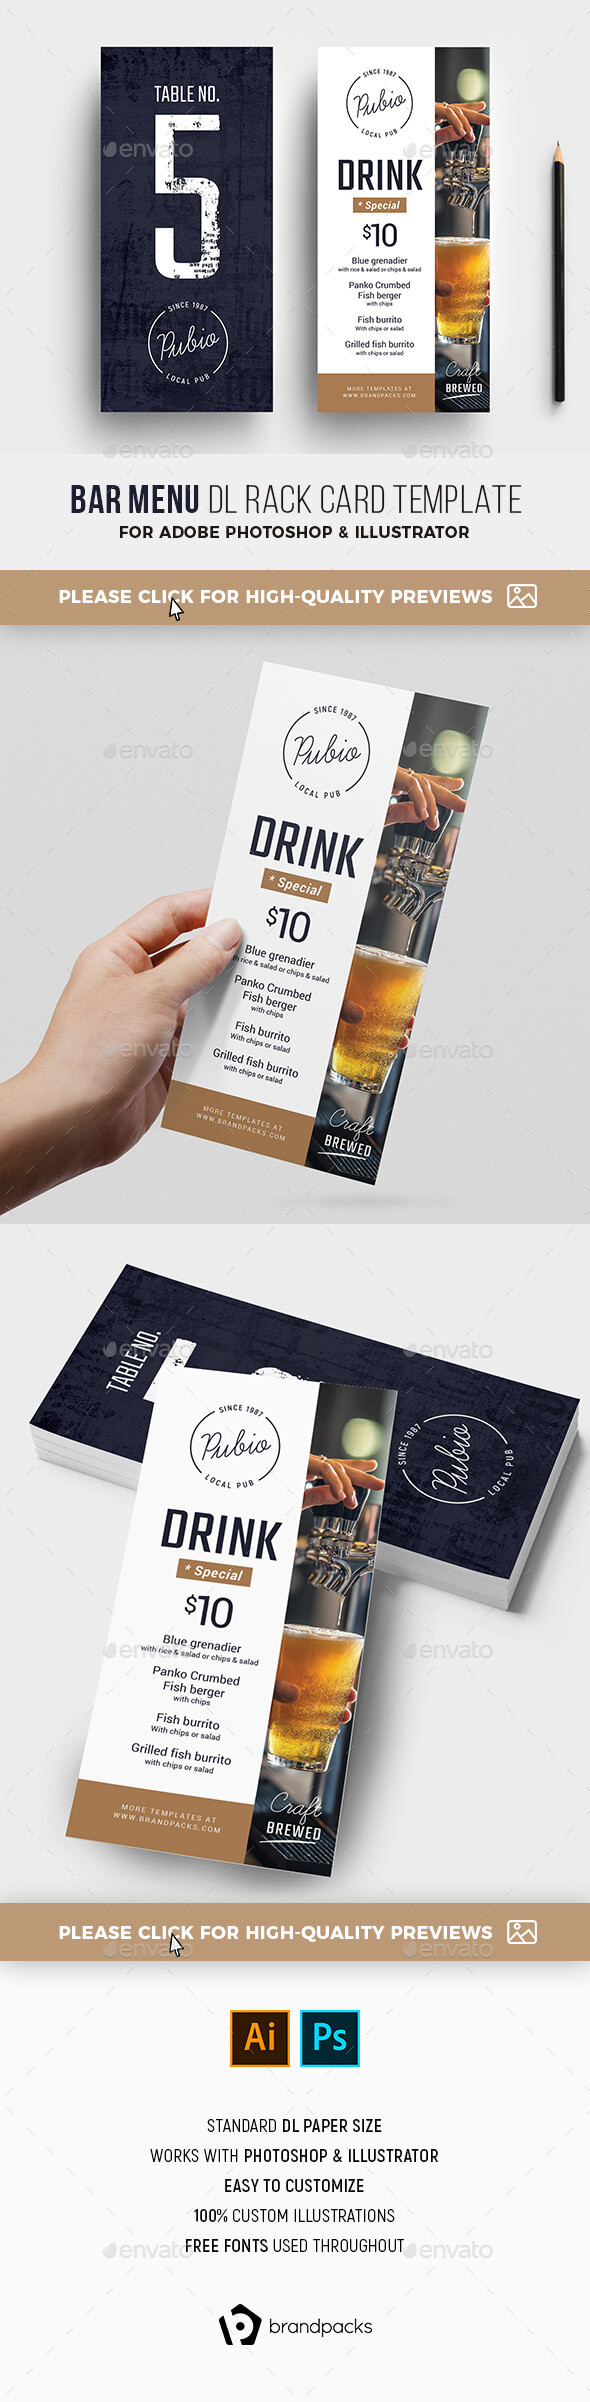 Brandpacks And Dl Card Graphics, Designs & Templates Pertaining To Dl Card Template